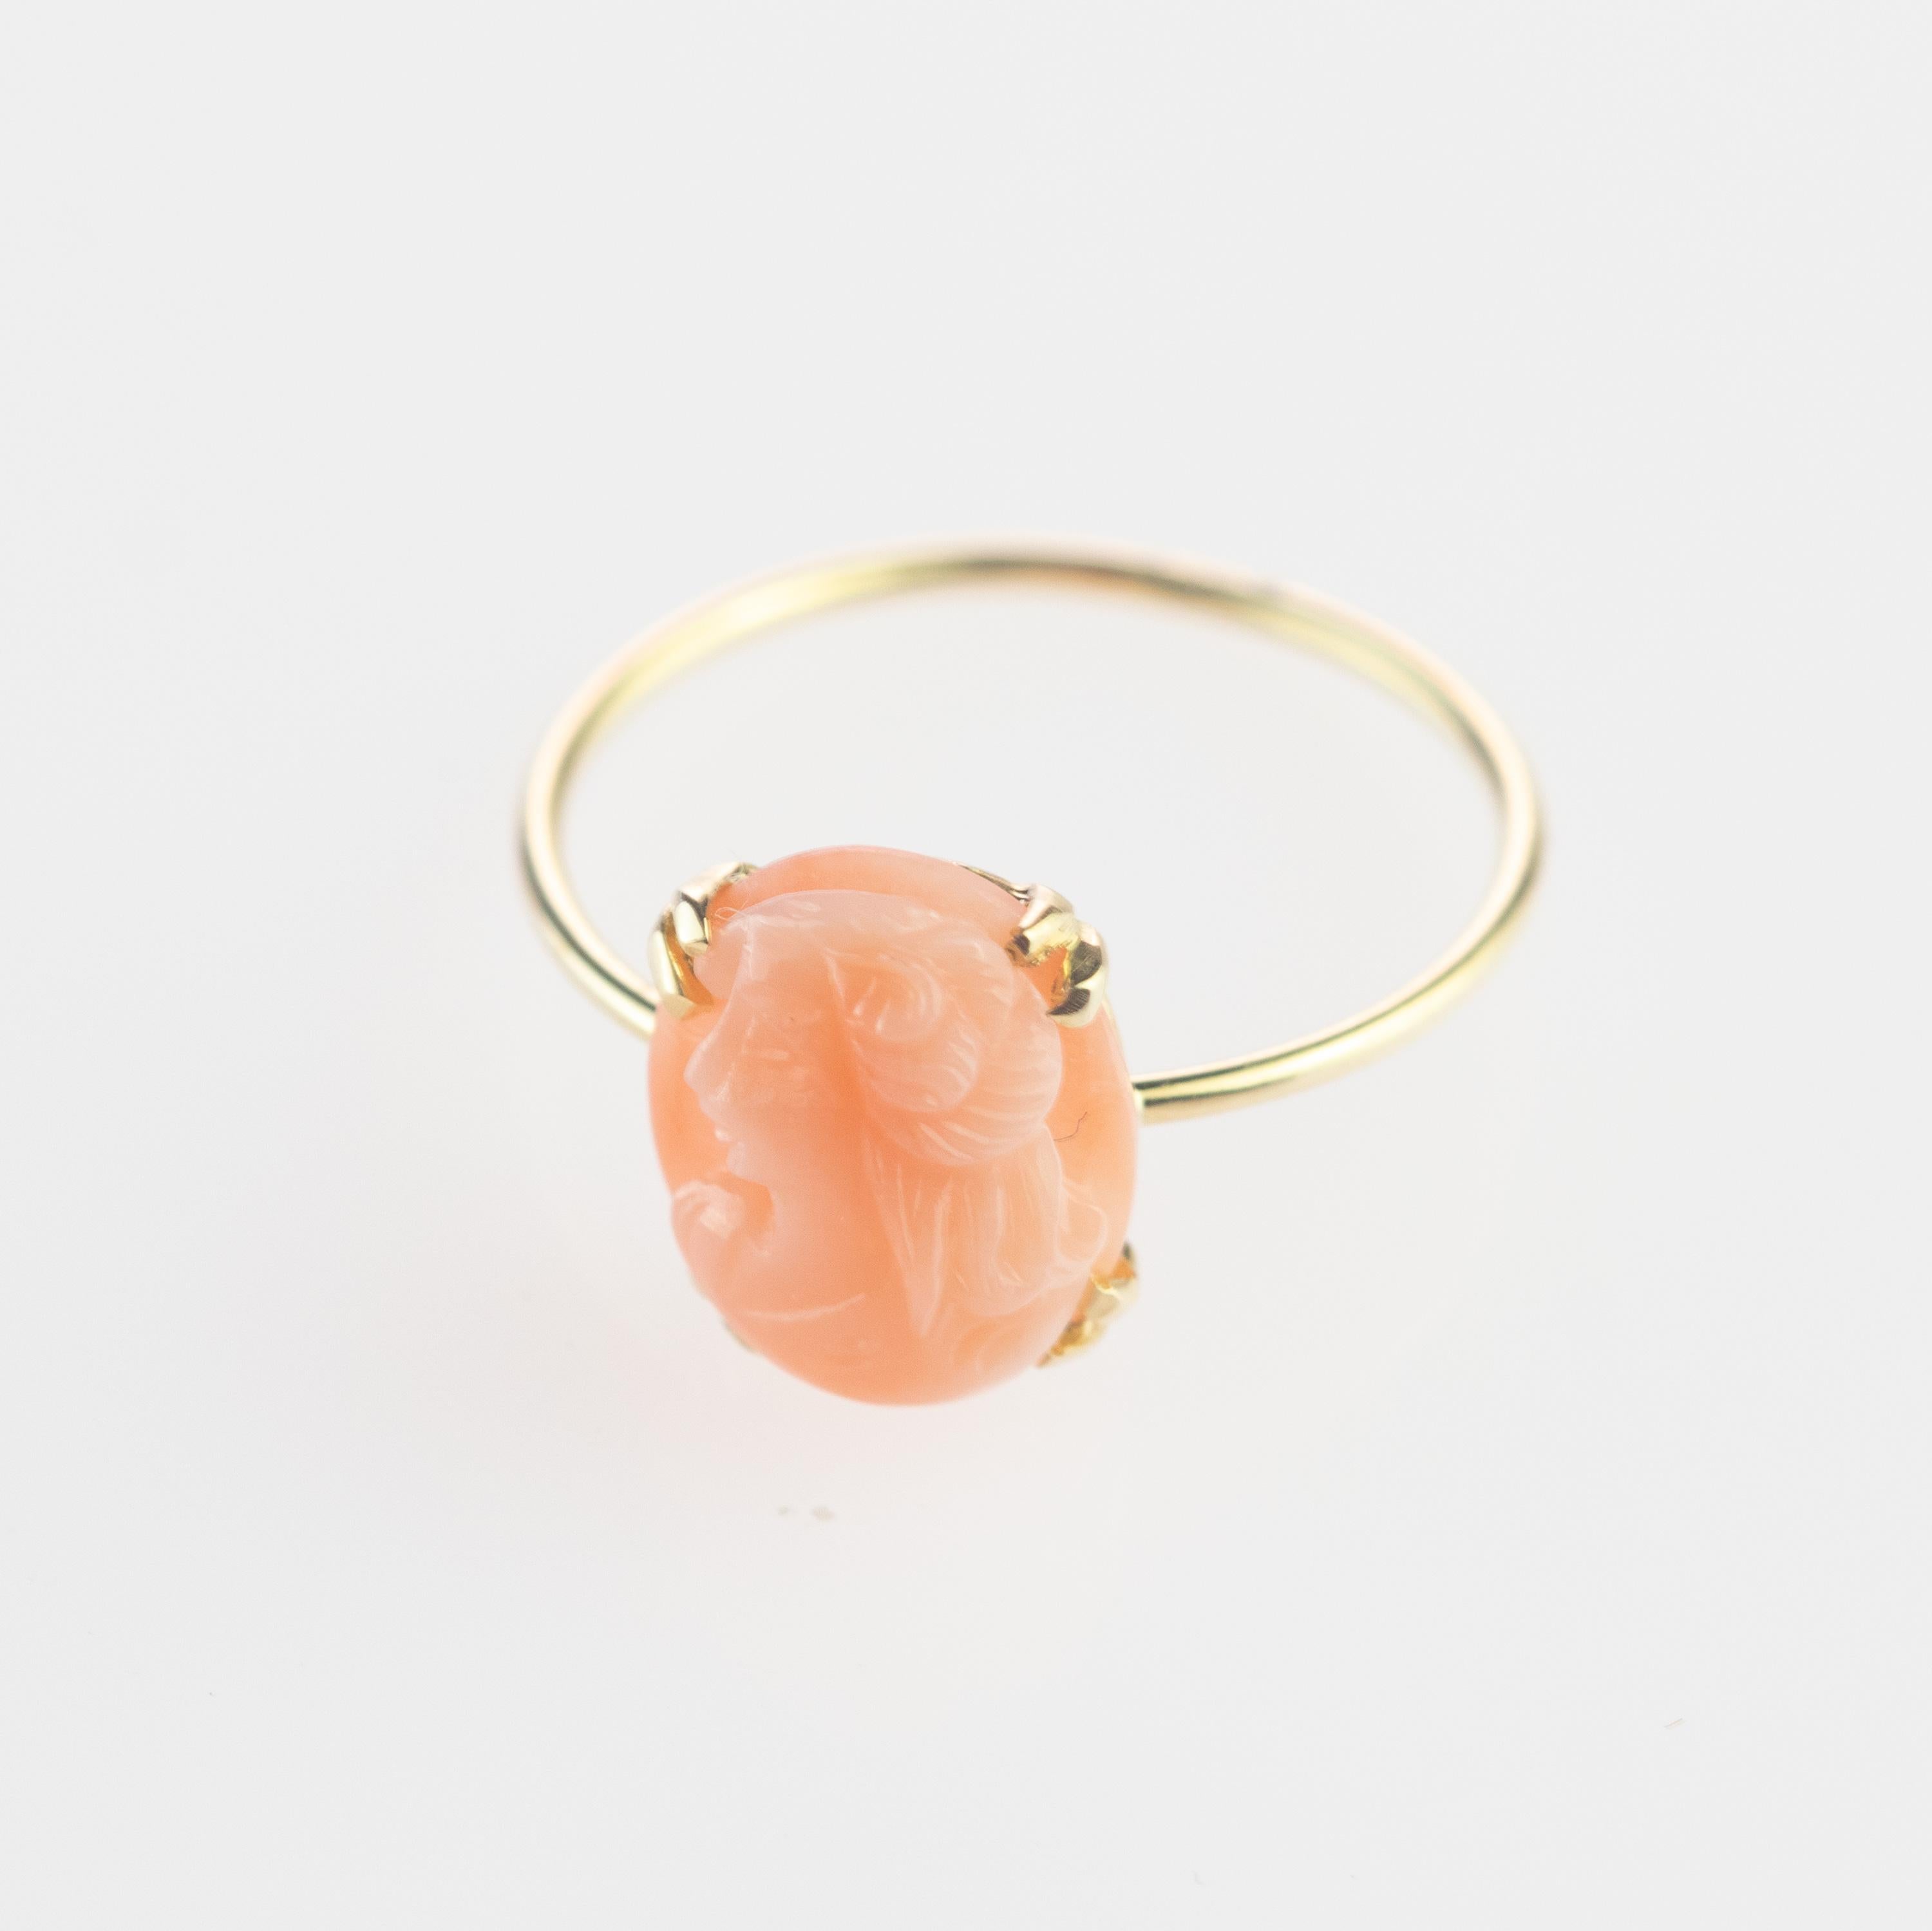 Intini Jewels 1.5 Carat Pink Cammeo Coral 18 Karat Gold Oval Handmade Chic Ring For Sale 1